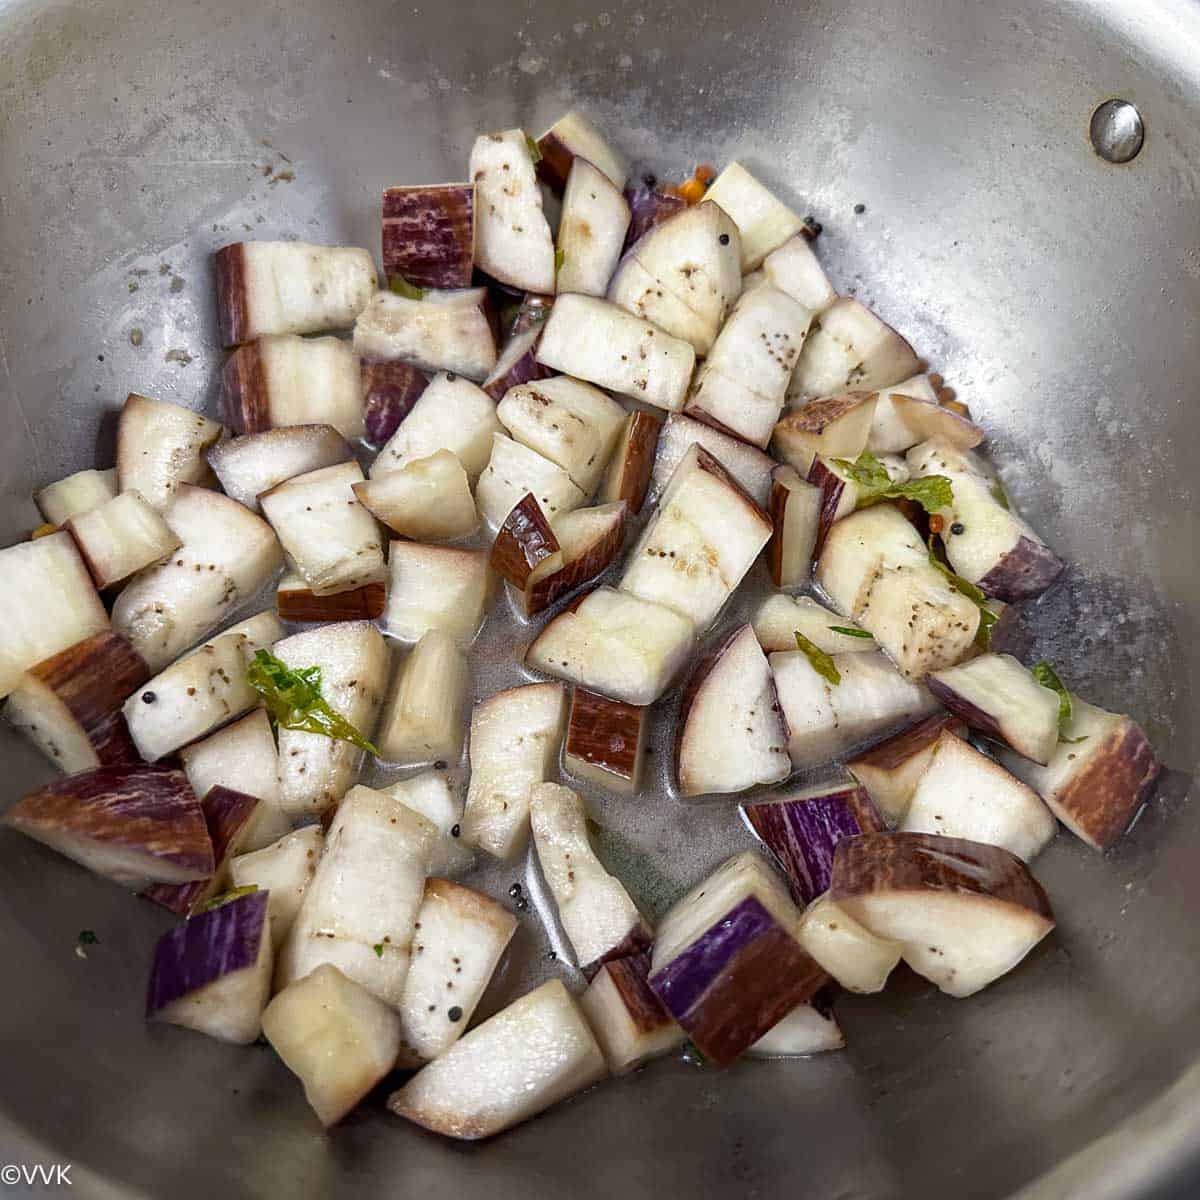 cooking the brinjal